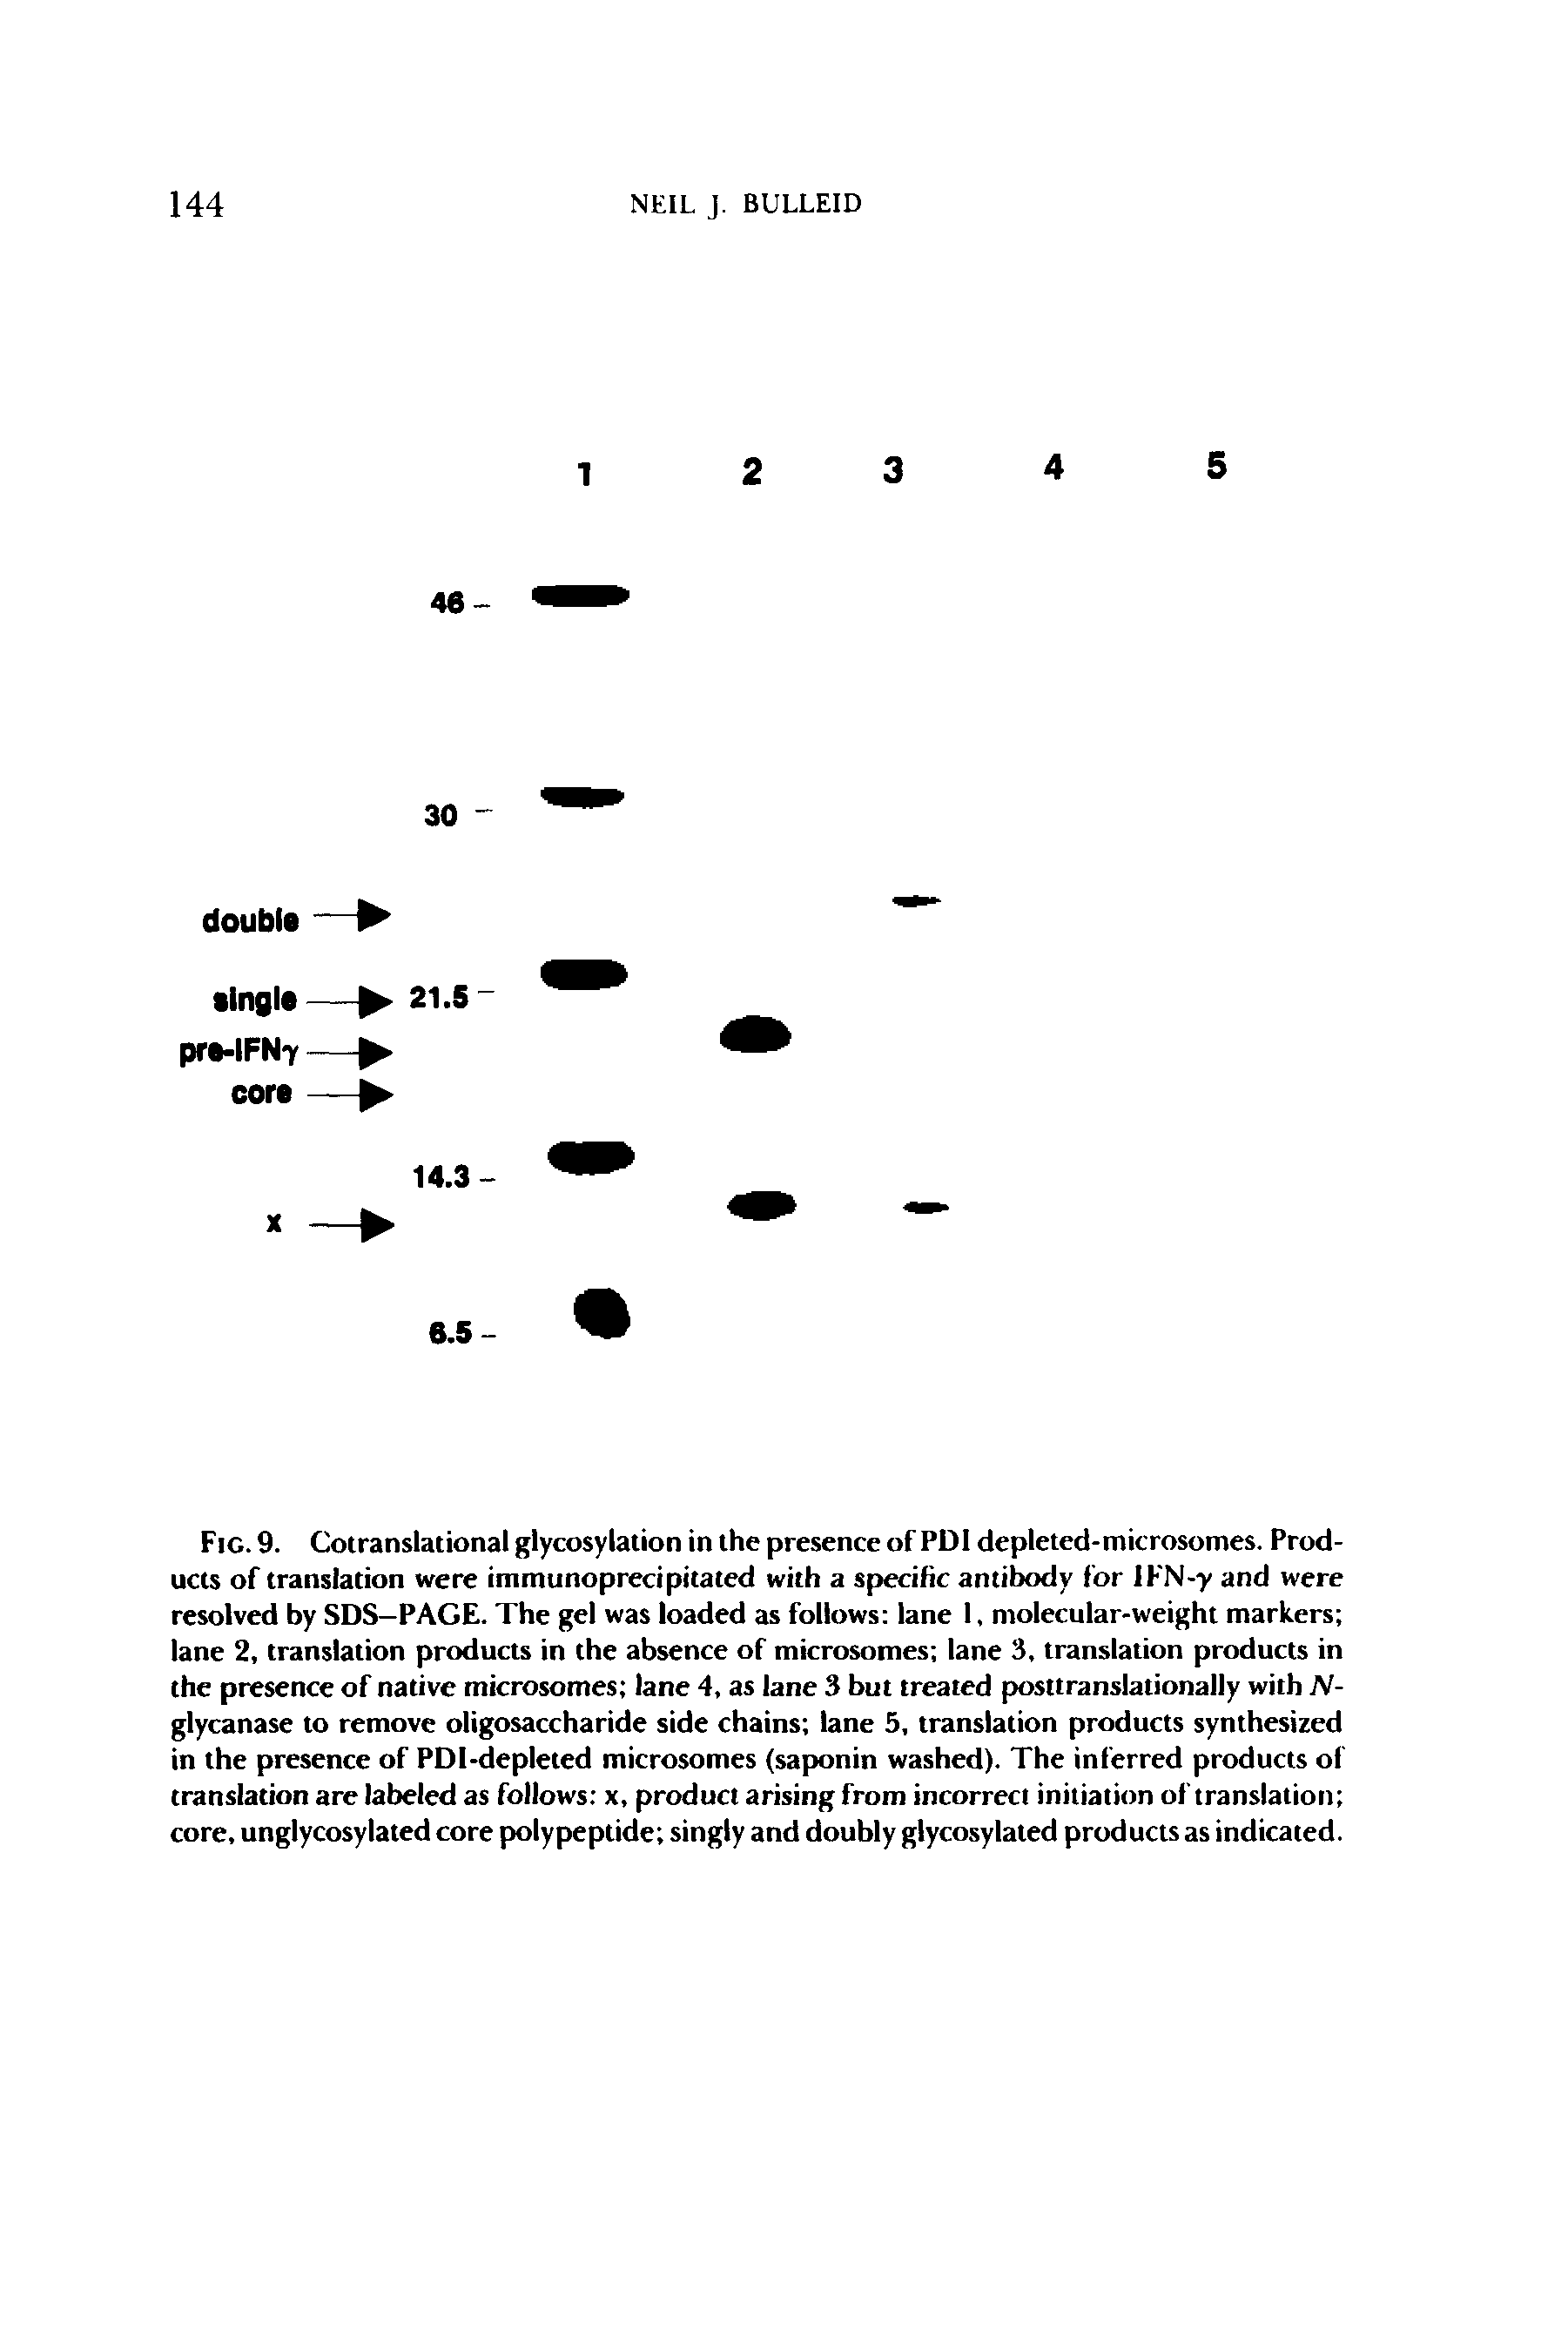 Fig. 9. Cotranslational glycosylalion in the presence of PDl depleted-microsomes. Products of translation were immunoprecipitated with a specific antibody for IKN-y and were resolved by SDS—PAGE. The gel was loaded as follows lane 1, molecular-weight markers lane 2, translation products in the absence of microsomes lane 3, translation products in the presence of native microsomes lane 4, as lane 3 but treated posttranslationally with N-glycanase to remove oligosaccharide side chains lane 5, translation products synthesized in the presence of PDI-depleted microsomes (saponin washed). The inferred products of translation are labeled as follows x, product arising from incorrect initiation of translation core, unglycosylated core polypeptide singly and doubly glycosylated products as indicated.